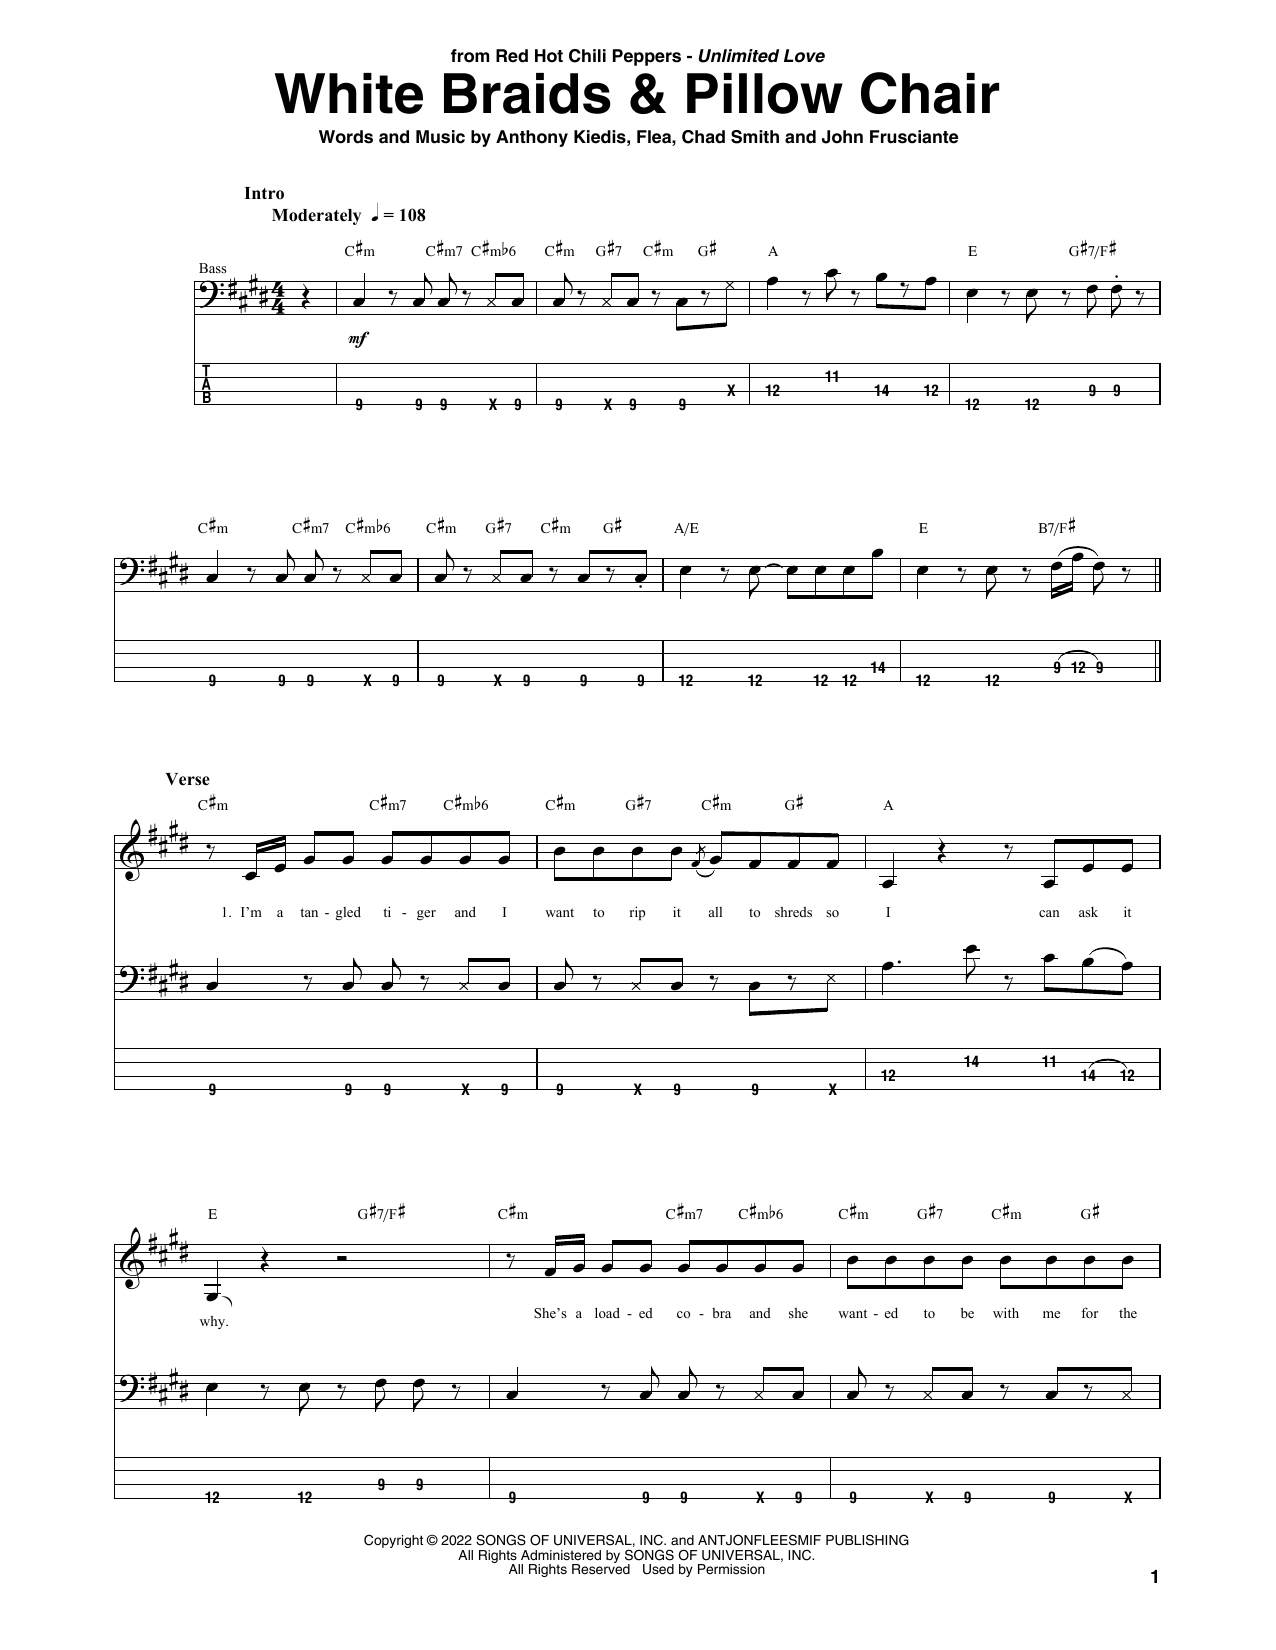 Download Red Hot Chili Peppers White Braids & Pillow Chair Sheet Music